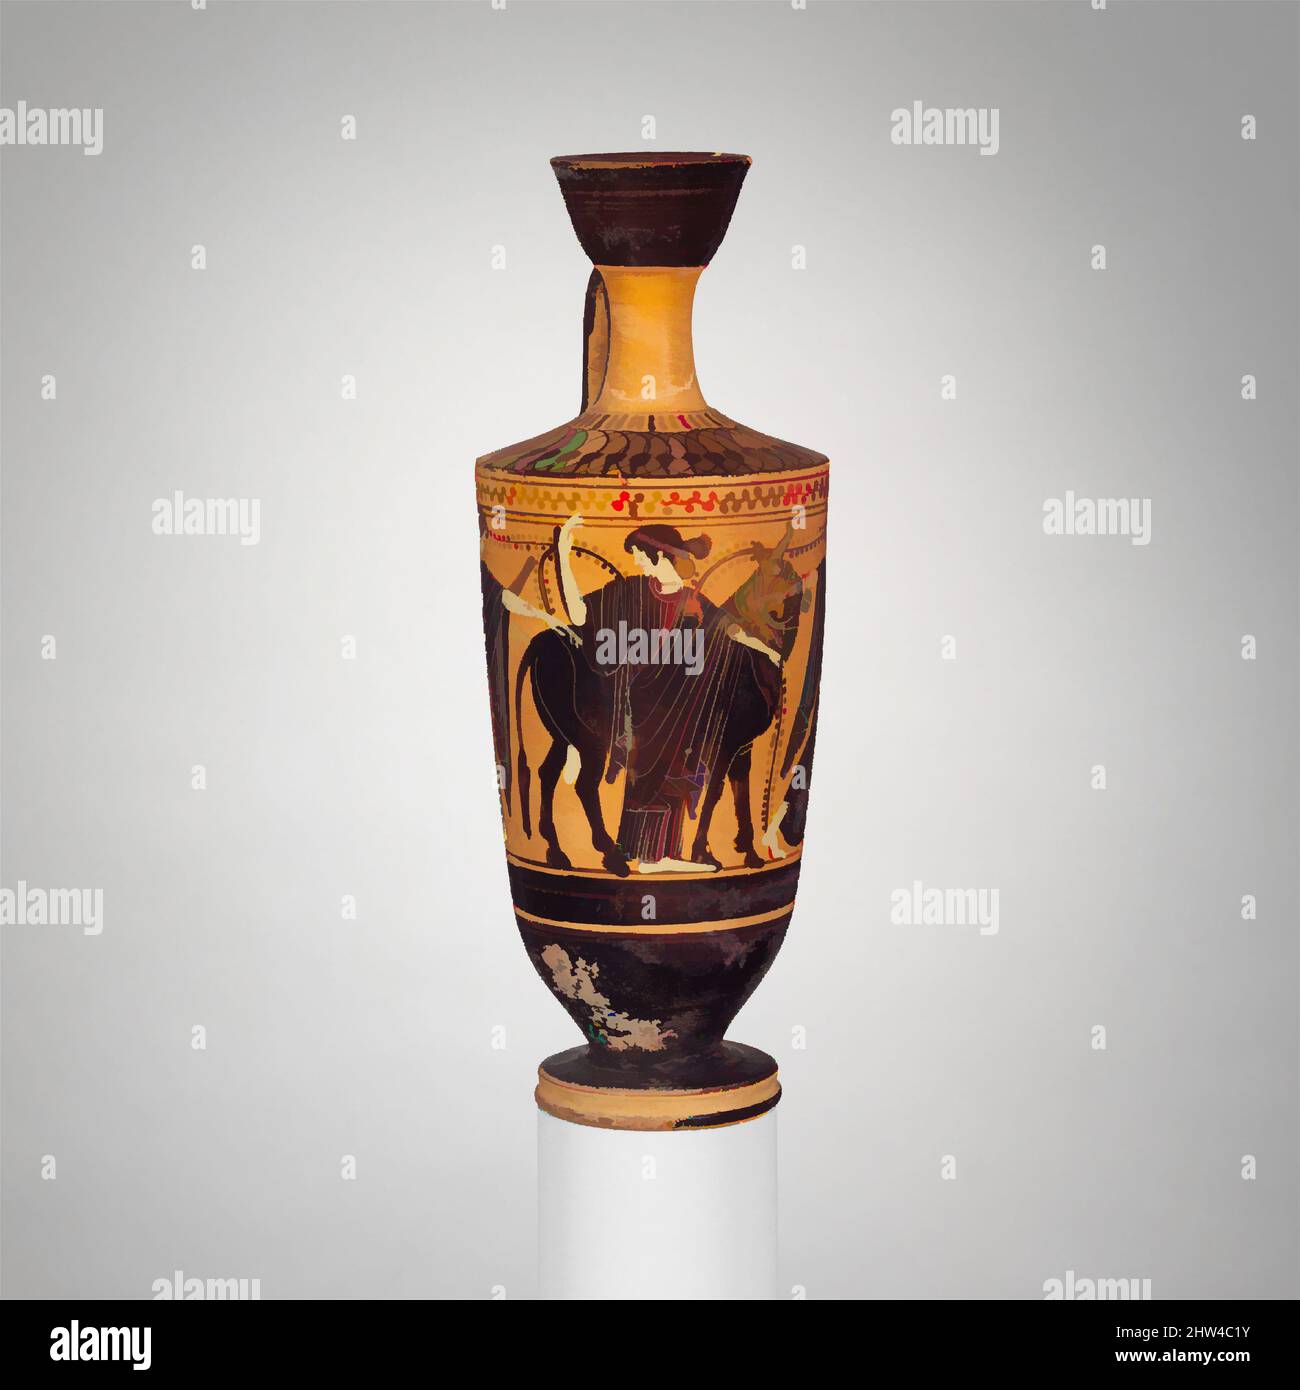 Art inspired by Terracotta lekythos (oil flask), Late Archaic, 1st quarter of 5th century B.C., Greek, Attic, Terracotta; black-figure, H. 7 7/8 in. (20 cm), Vases, Sacrificial procession with bull and three women, Classic works modernized by Artotop with a splash of modernity. Shapes, color and value, eye-catching visual impact on art. Emotions through freedom of artworks in a contemporary way. A timeless message pursuing a wildly creative new direction. Artists turning to the digital medium and creating the Artotop NFT Stock Photo